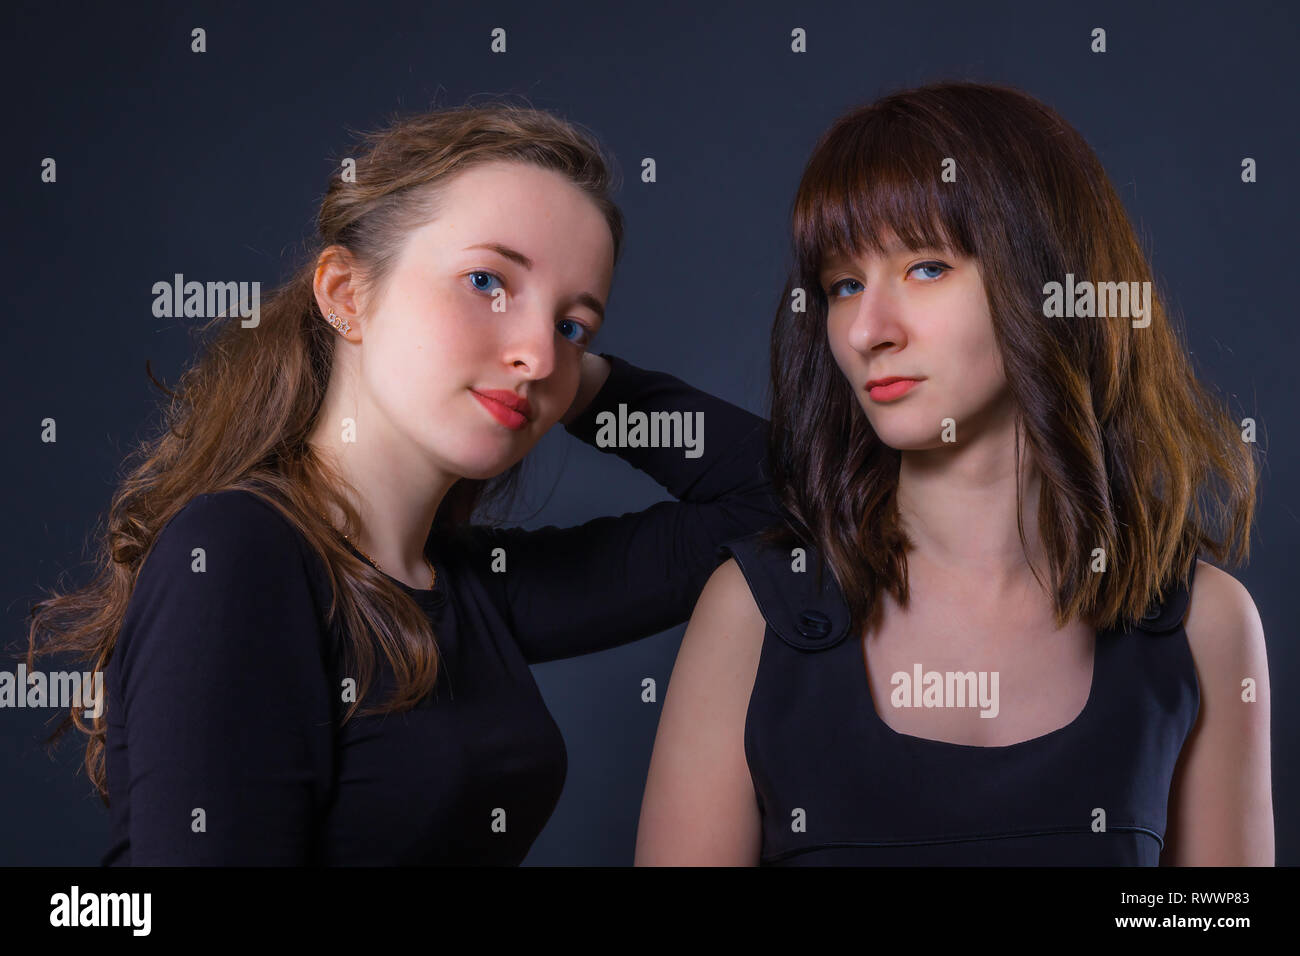 Group portrait of two girls on a dark background Stock Photo